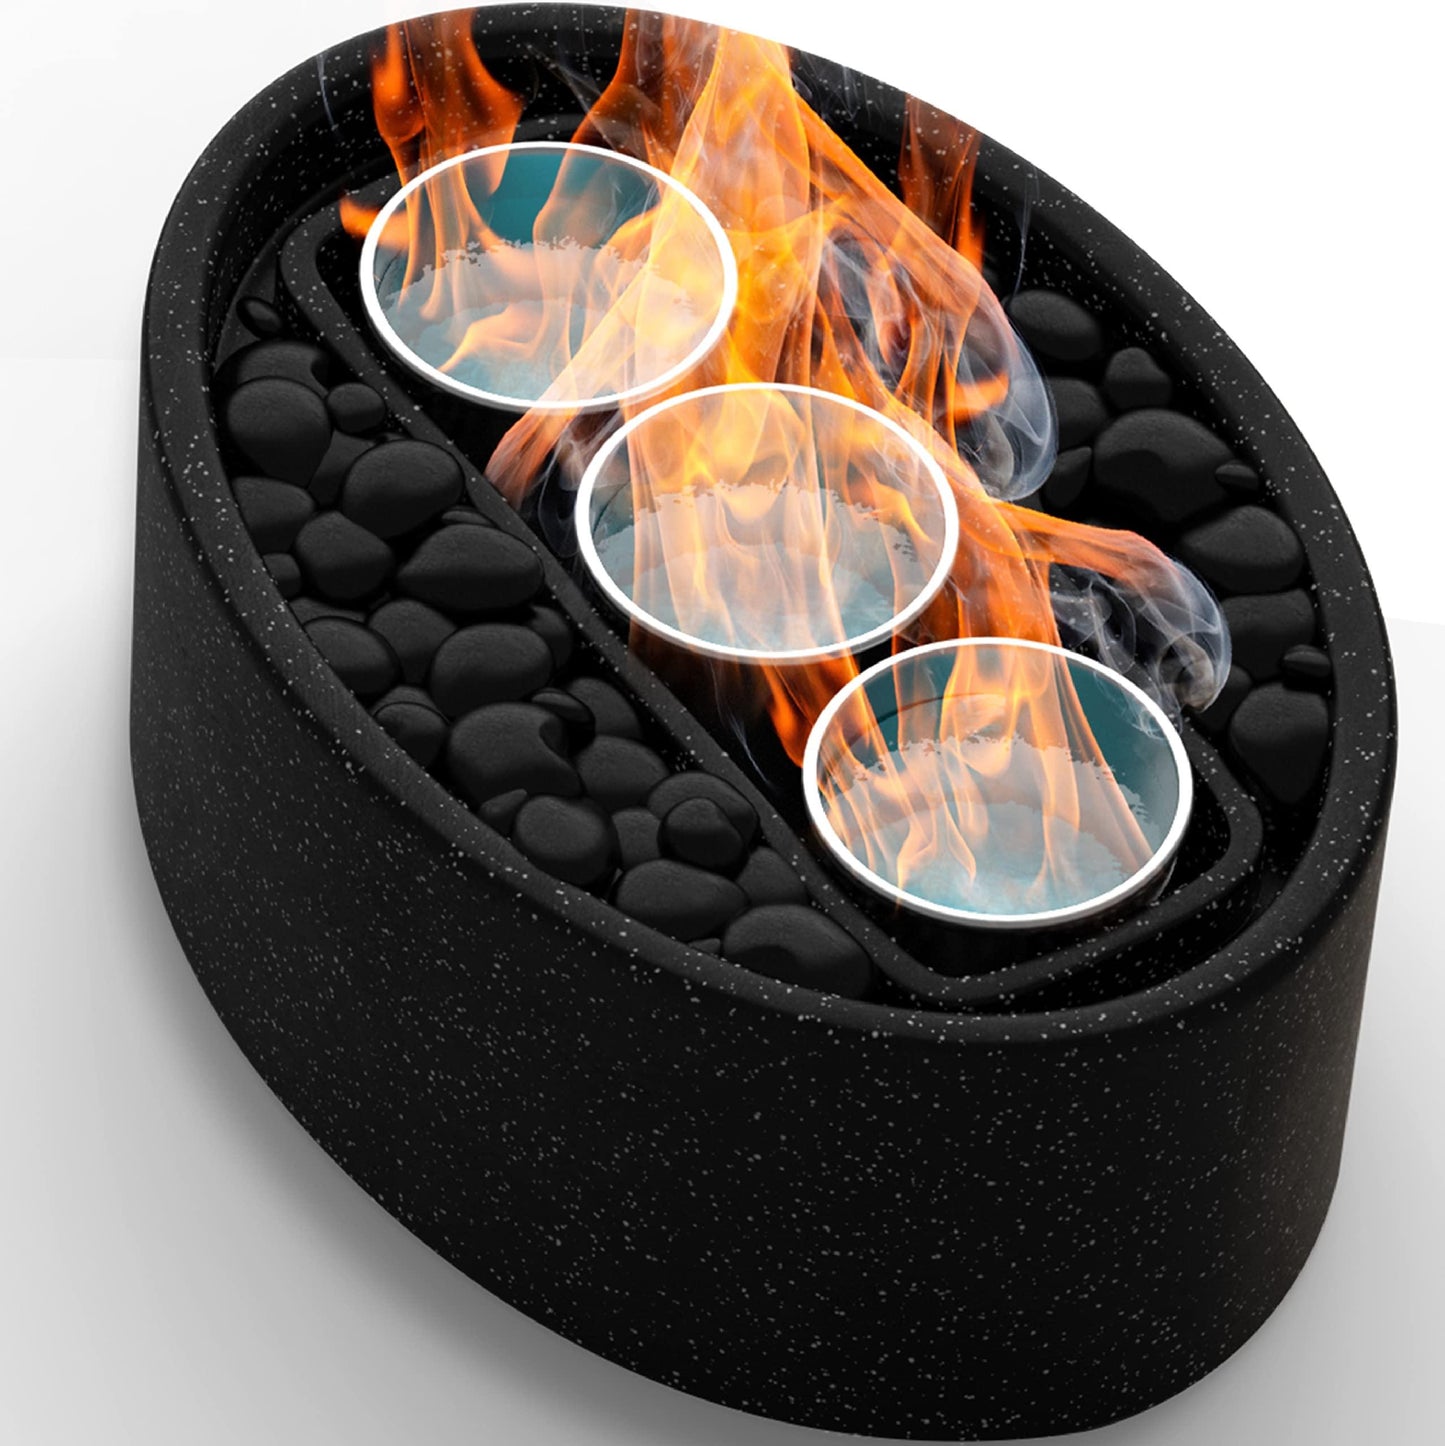 Vizayo Tabletop Fire Pit for Patio - 14.2 x 10.2 inch Indoor Outdoor Table Top Firepit Bowl - Use Gel Fuel Cans, Bioethanol or Isopropyl Alcohol - Tabletop Fireplace for Balcony, Patio Decor - Black - CookCave